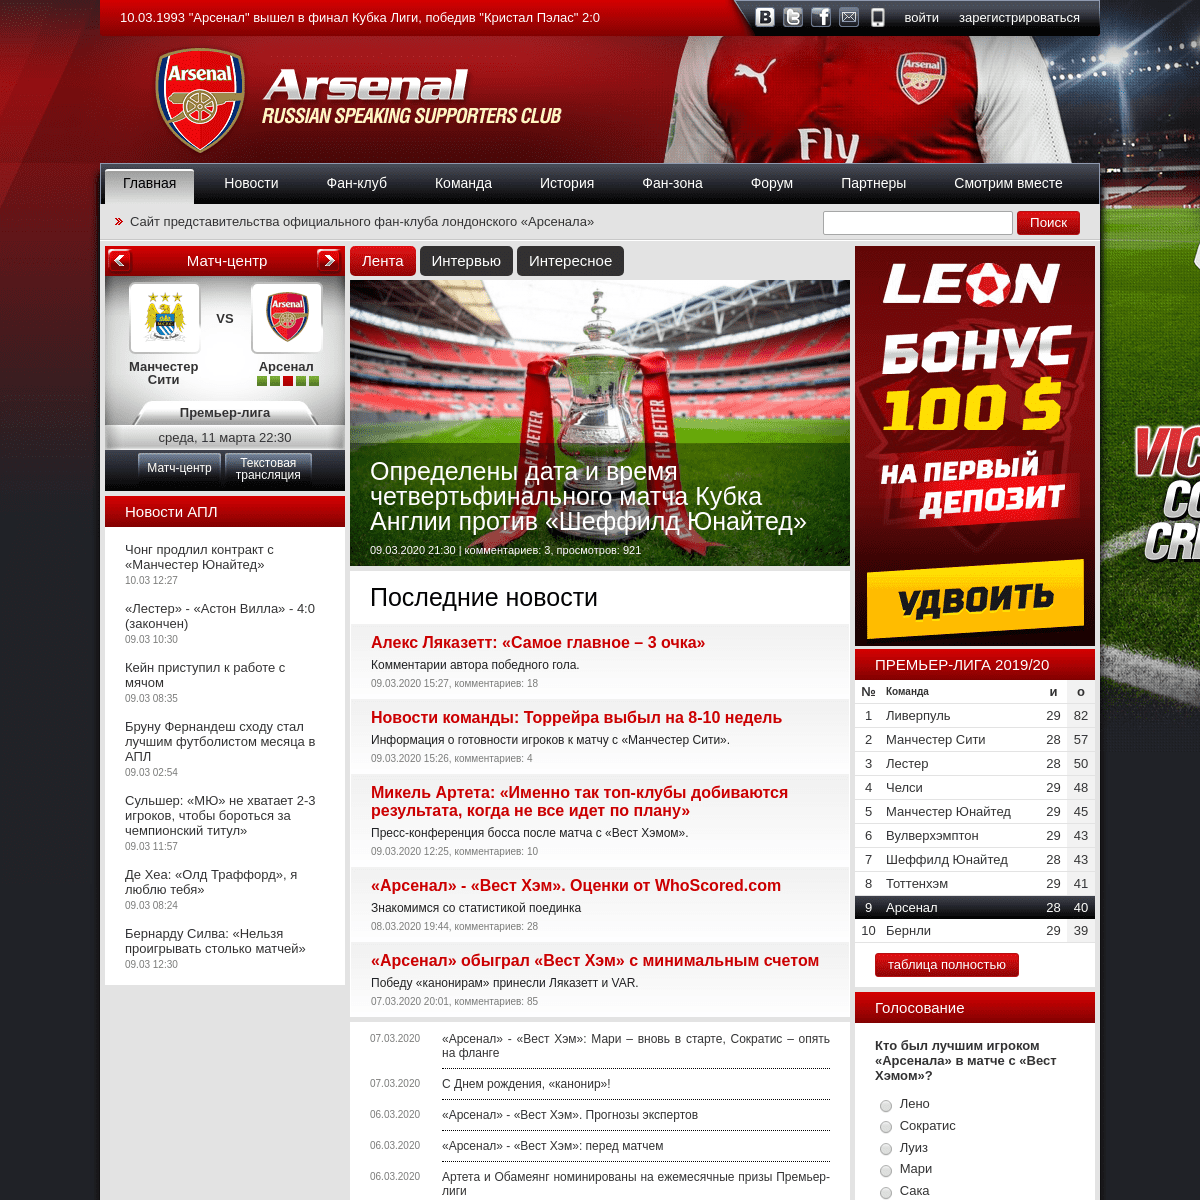 A complete backup of fc-arsenal.com